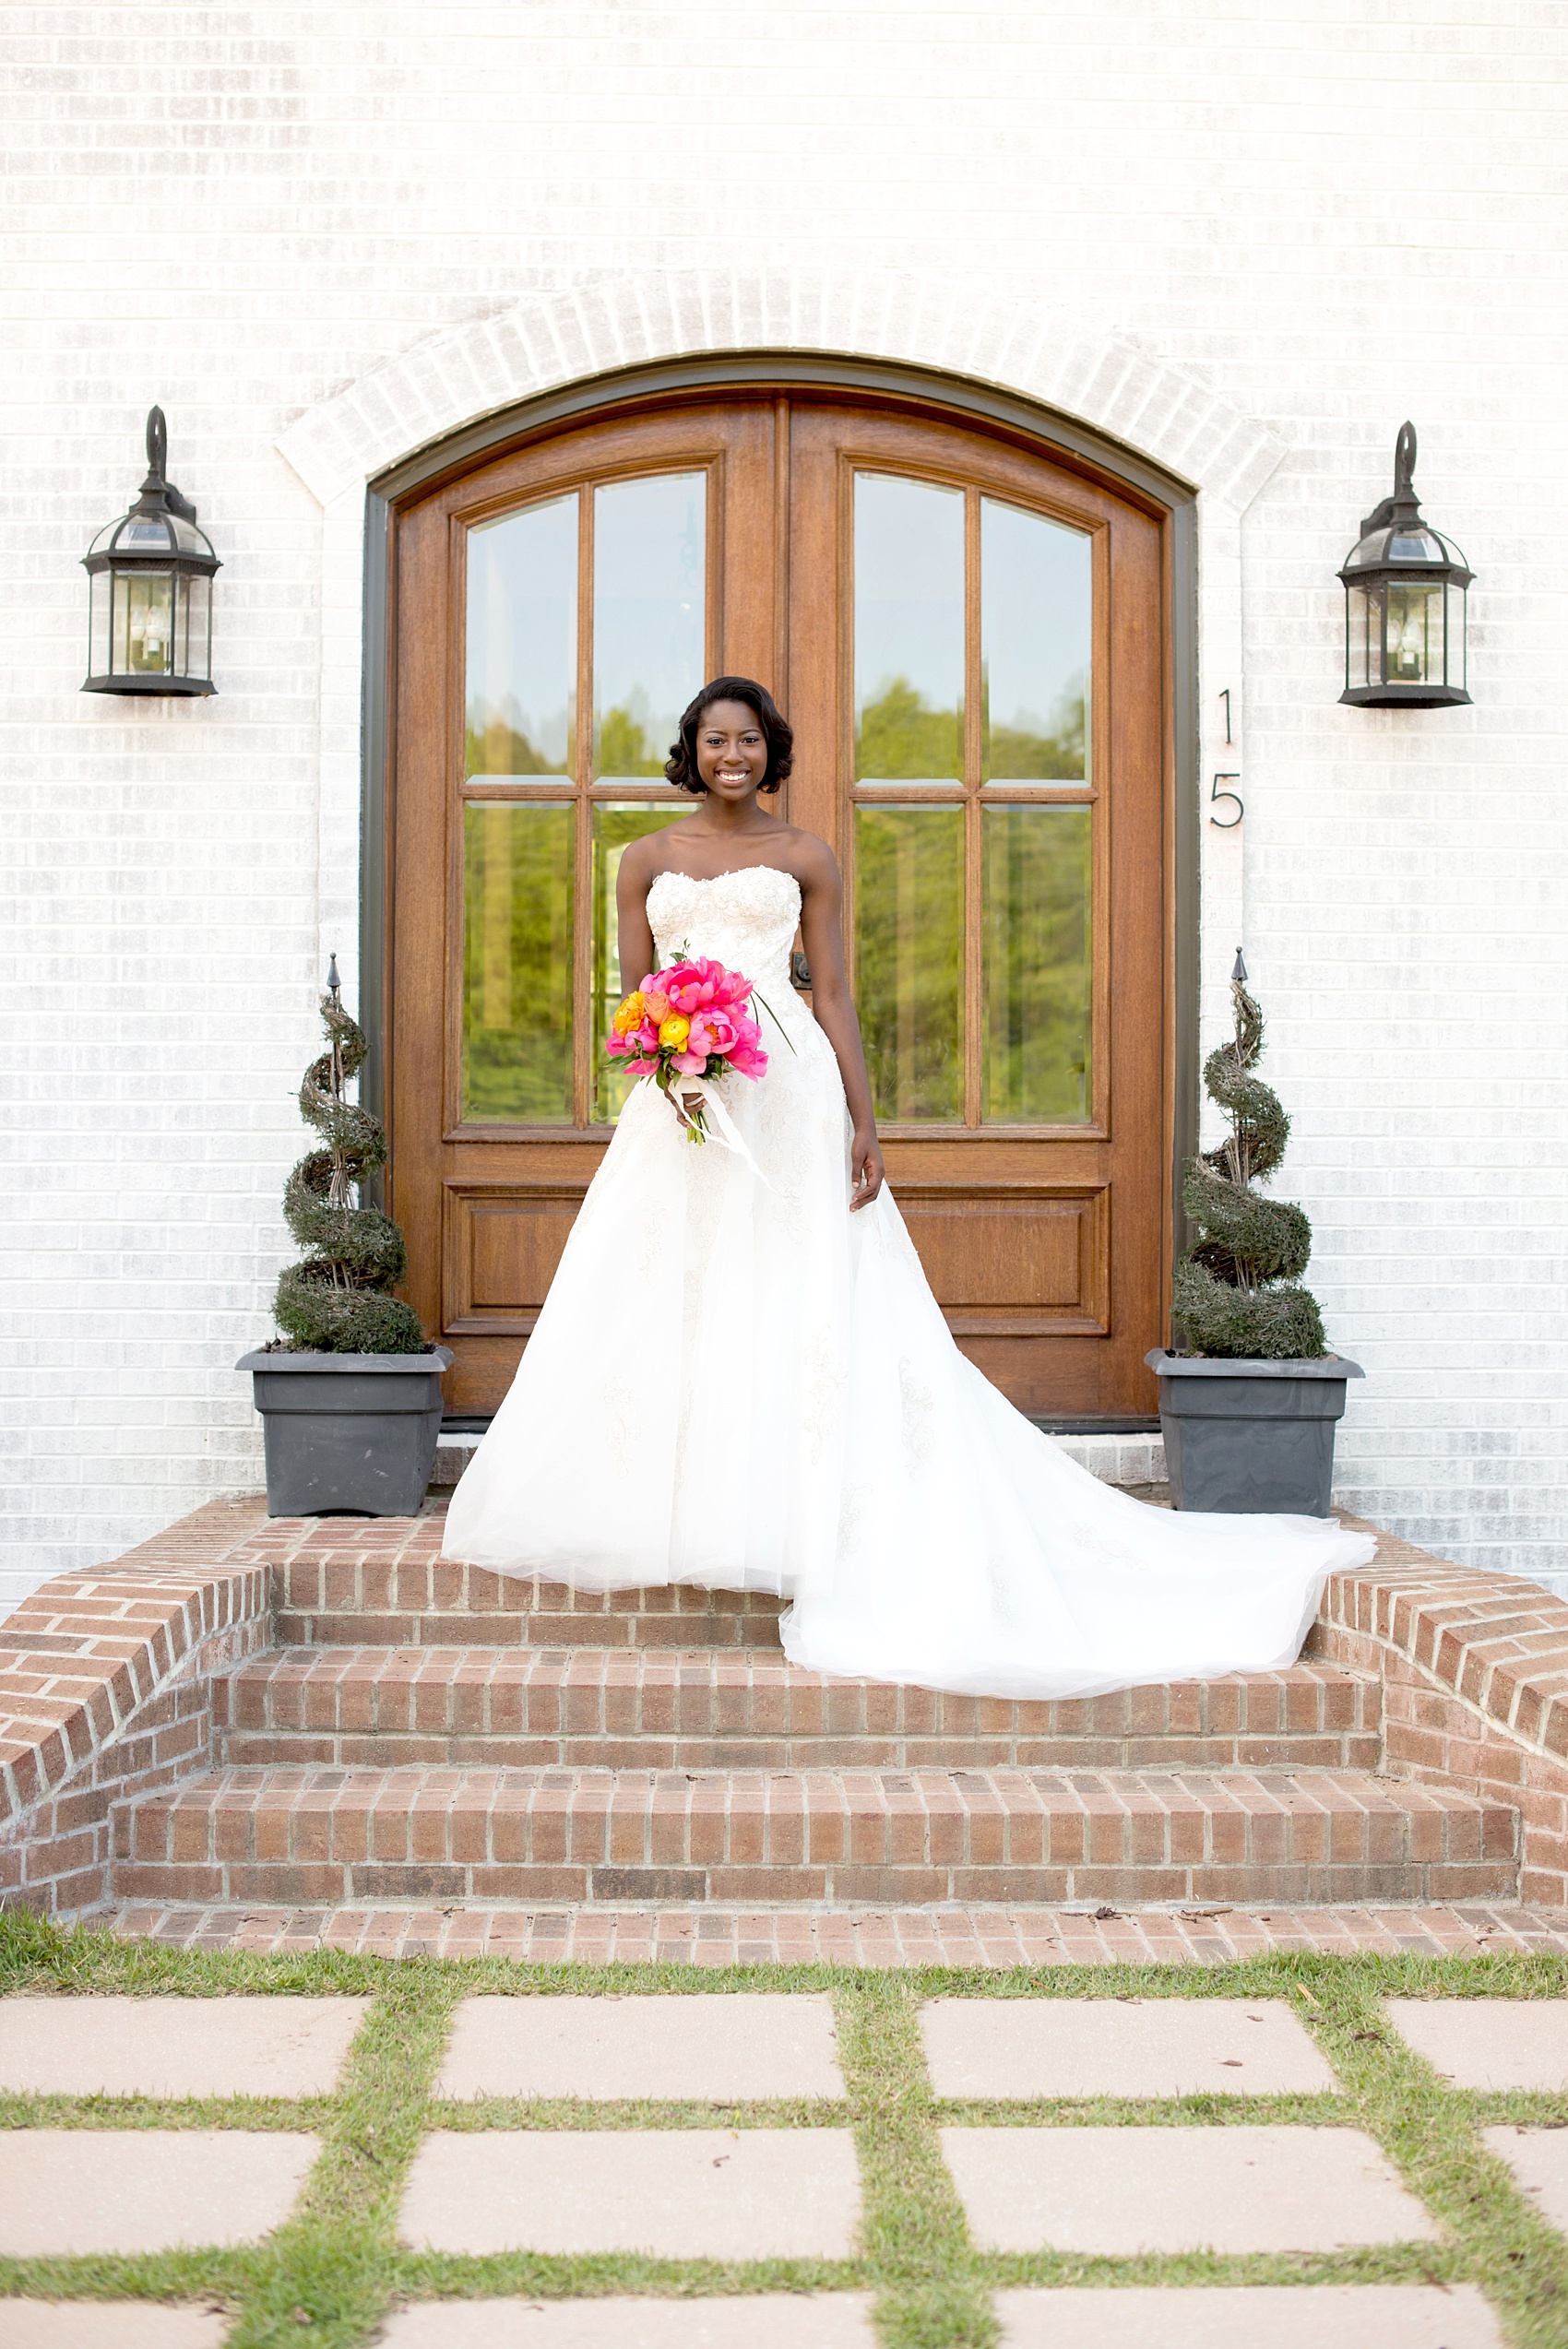 Mikkel Paige Photography wedding photo at The Bradford, NC. Bride in a strapless white gown on the steps of the elegant NC home.